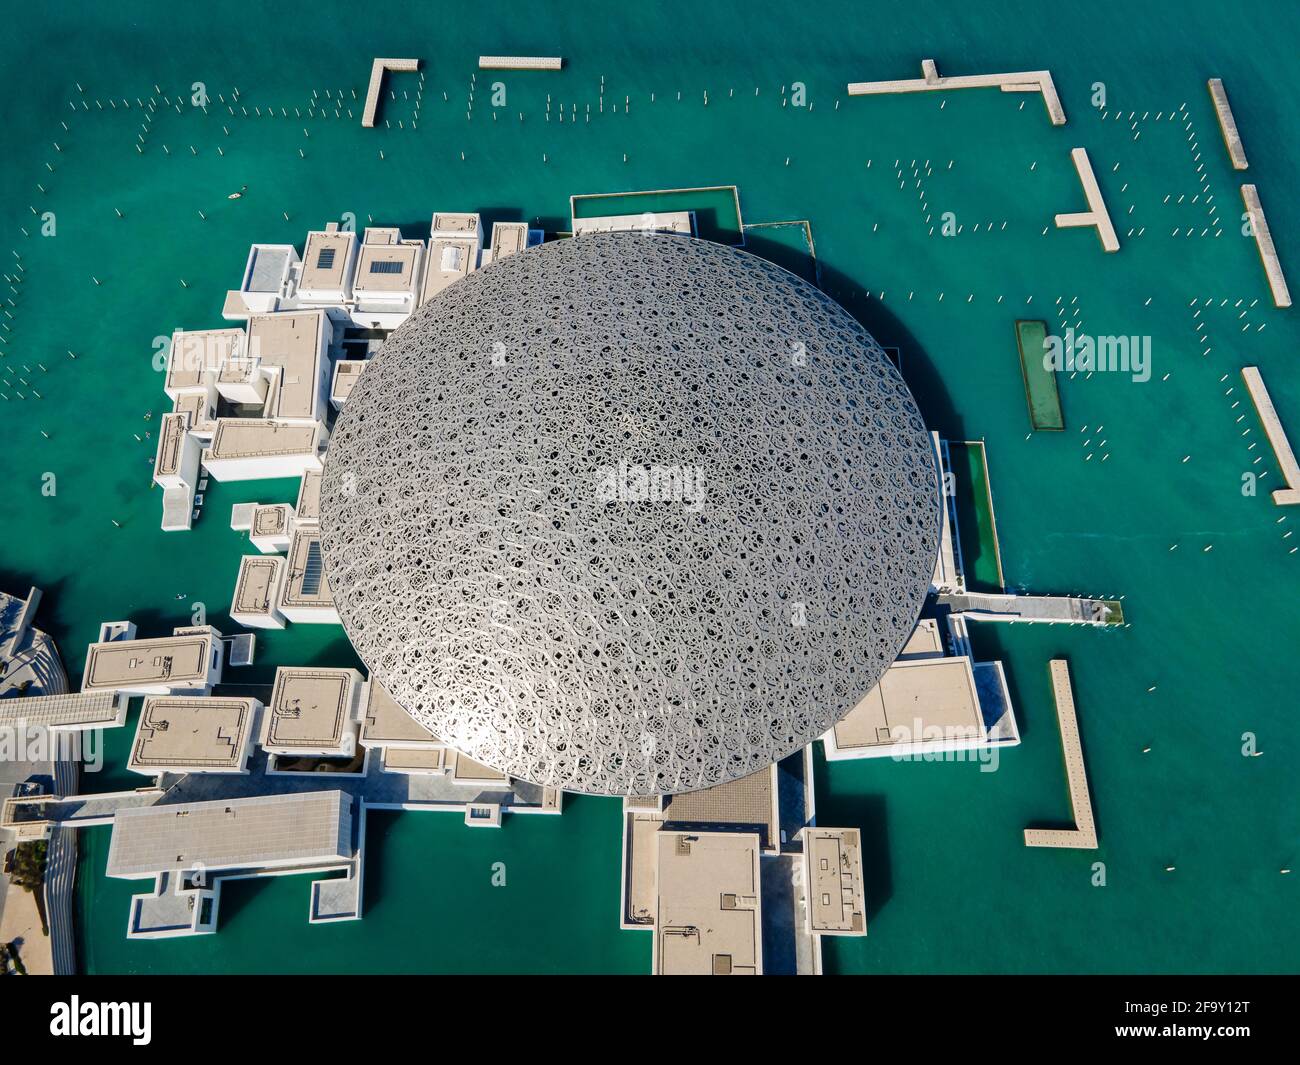 Abu Dhabi, United Arab Emirates - April 6, 2021: Top view of Louvre museum in Abu Dhabi emirate of the United Arab Emirates at sunrise aerial drone vi Stock Photo